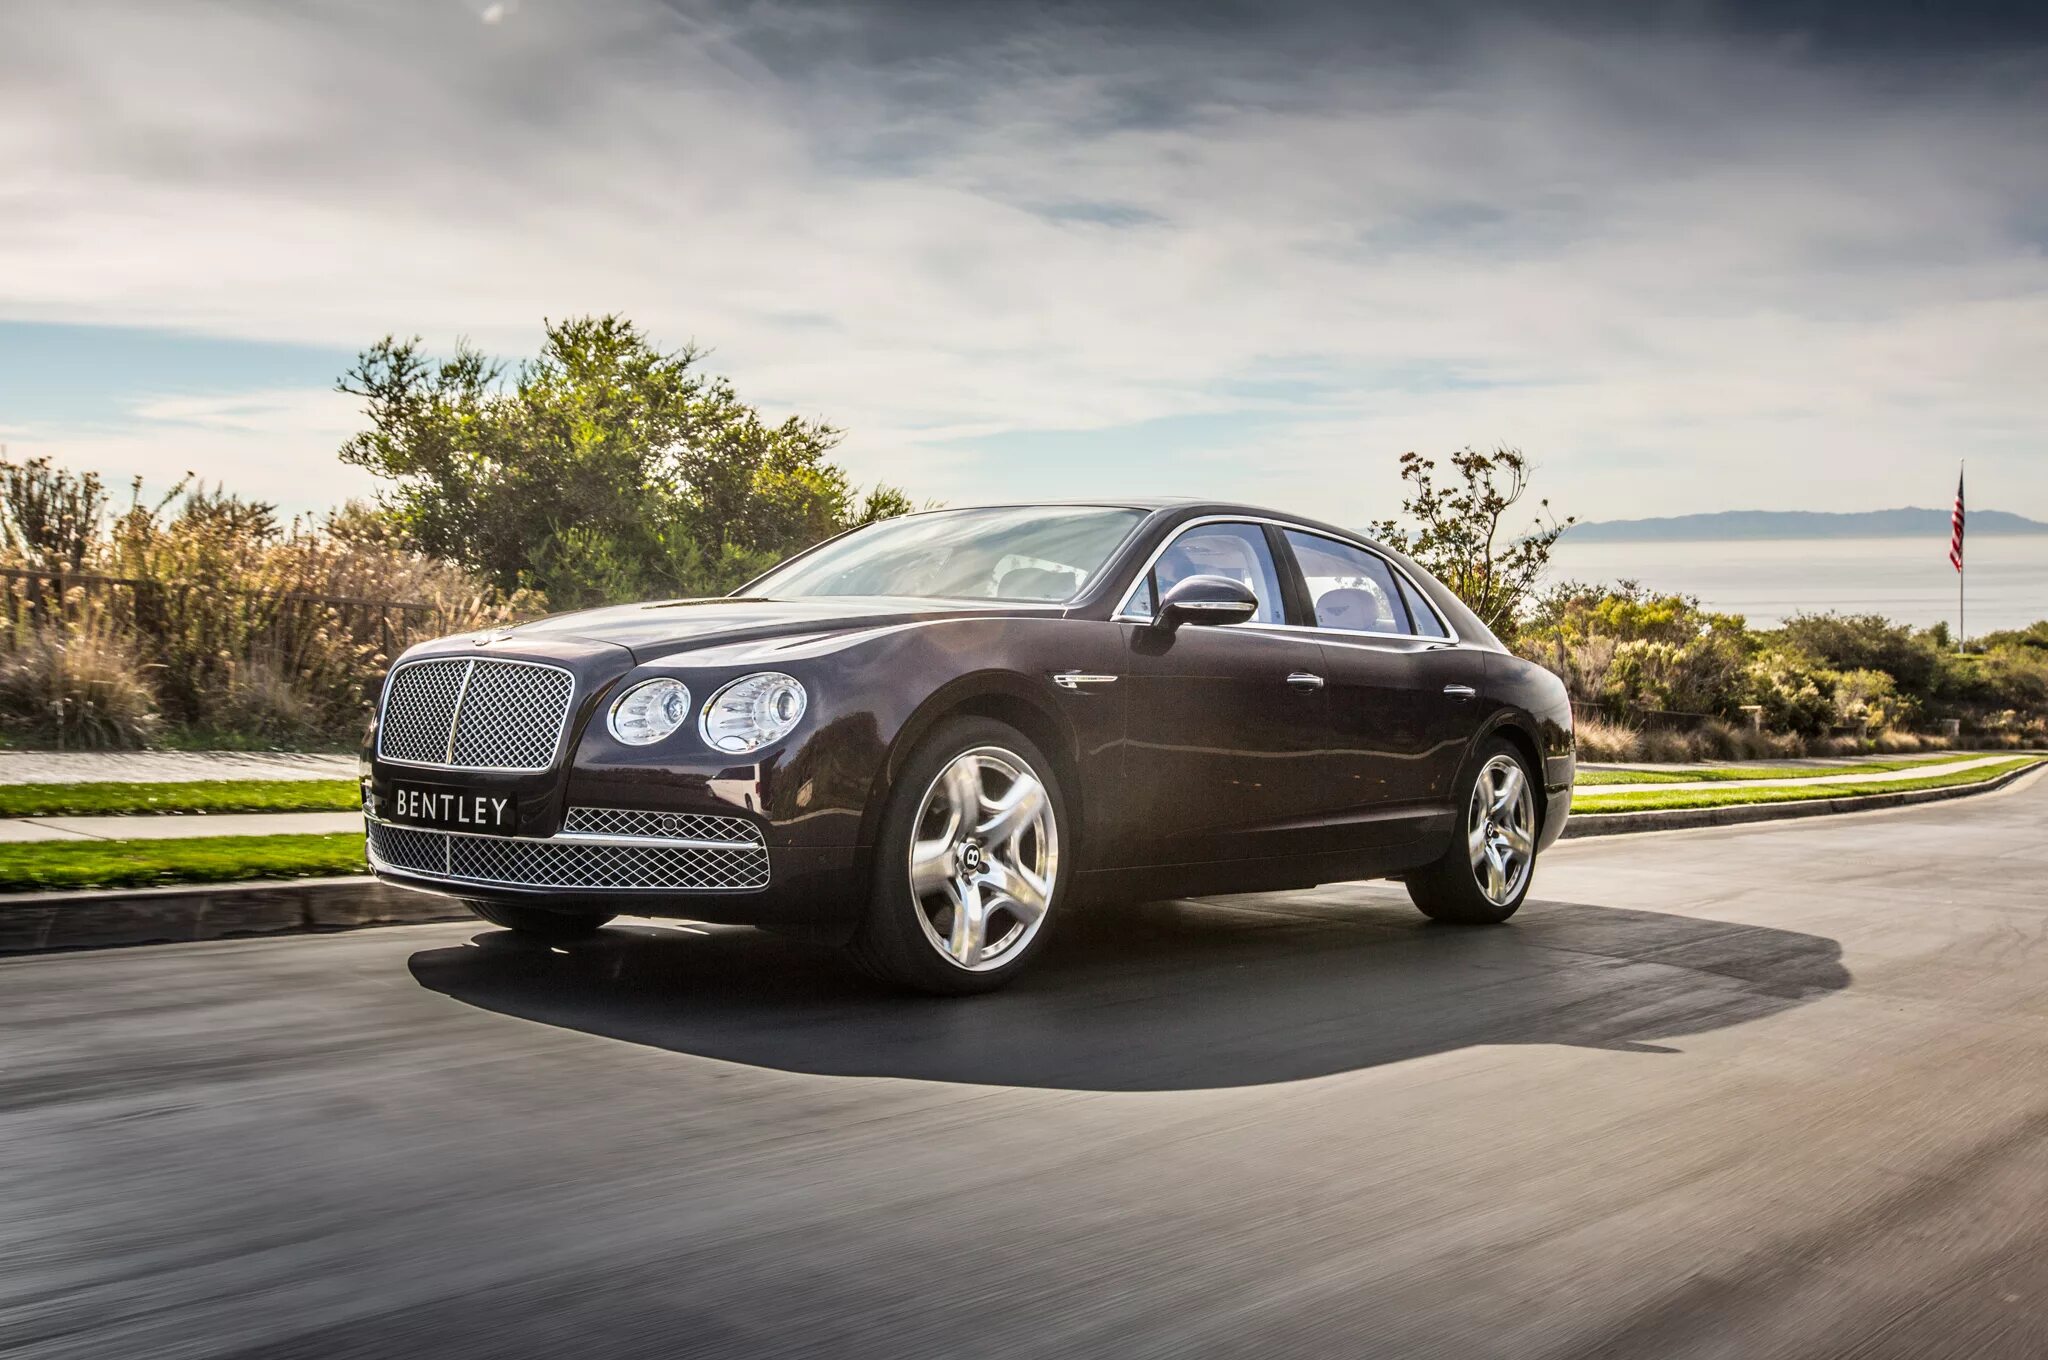 Bentley Flying Spur 2014. Bentley Flying Spur. Bentley Continental Flying Spur 2014. Бентли Flying Spur.